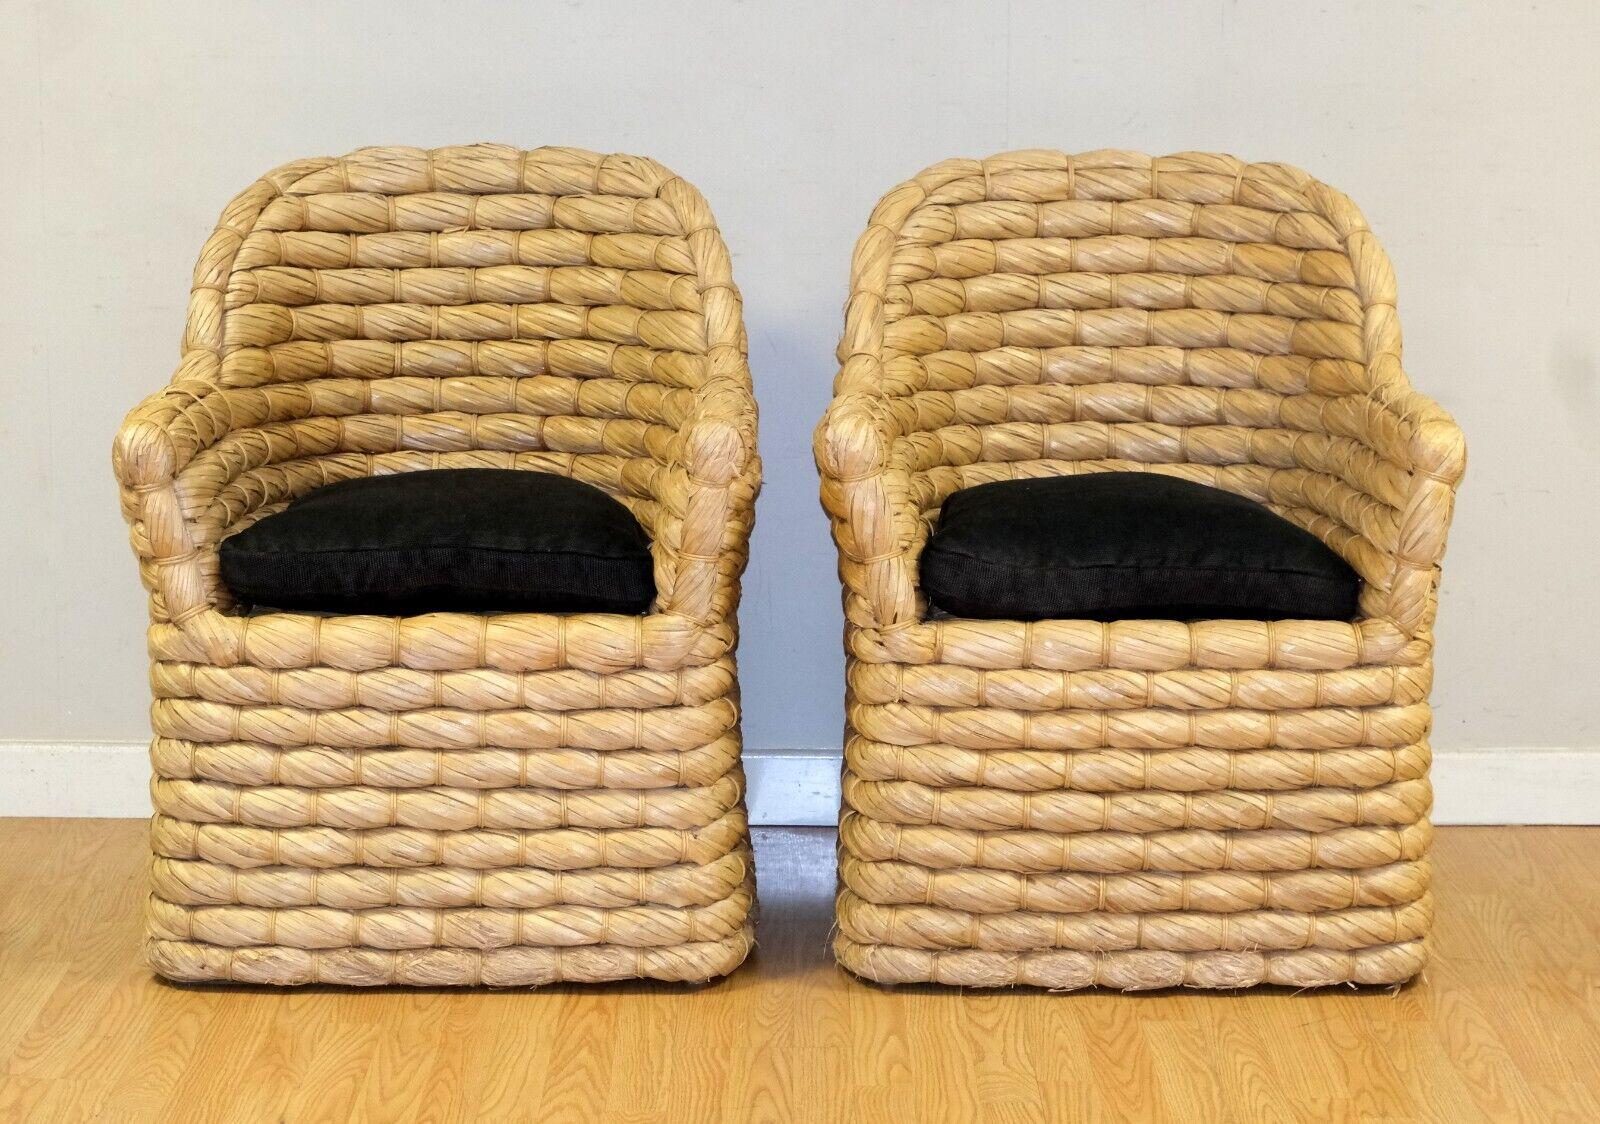 We are delighted to offer for sale this stunning pair of Ralph Lauren Joshua tree wicker /straw woven dining armchairs.

This well made and good looking pair of armchairs are from the well known Ralph Lauren designer, all speak of gorgeousness as